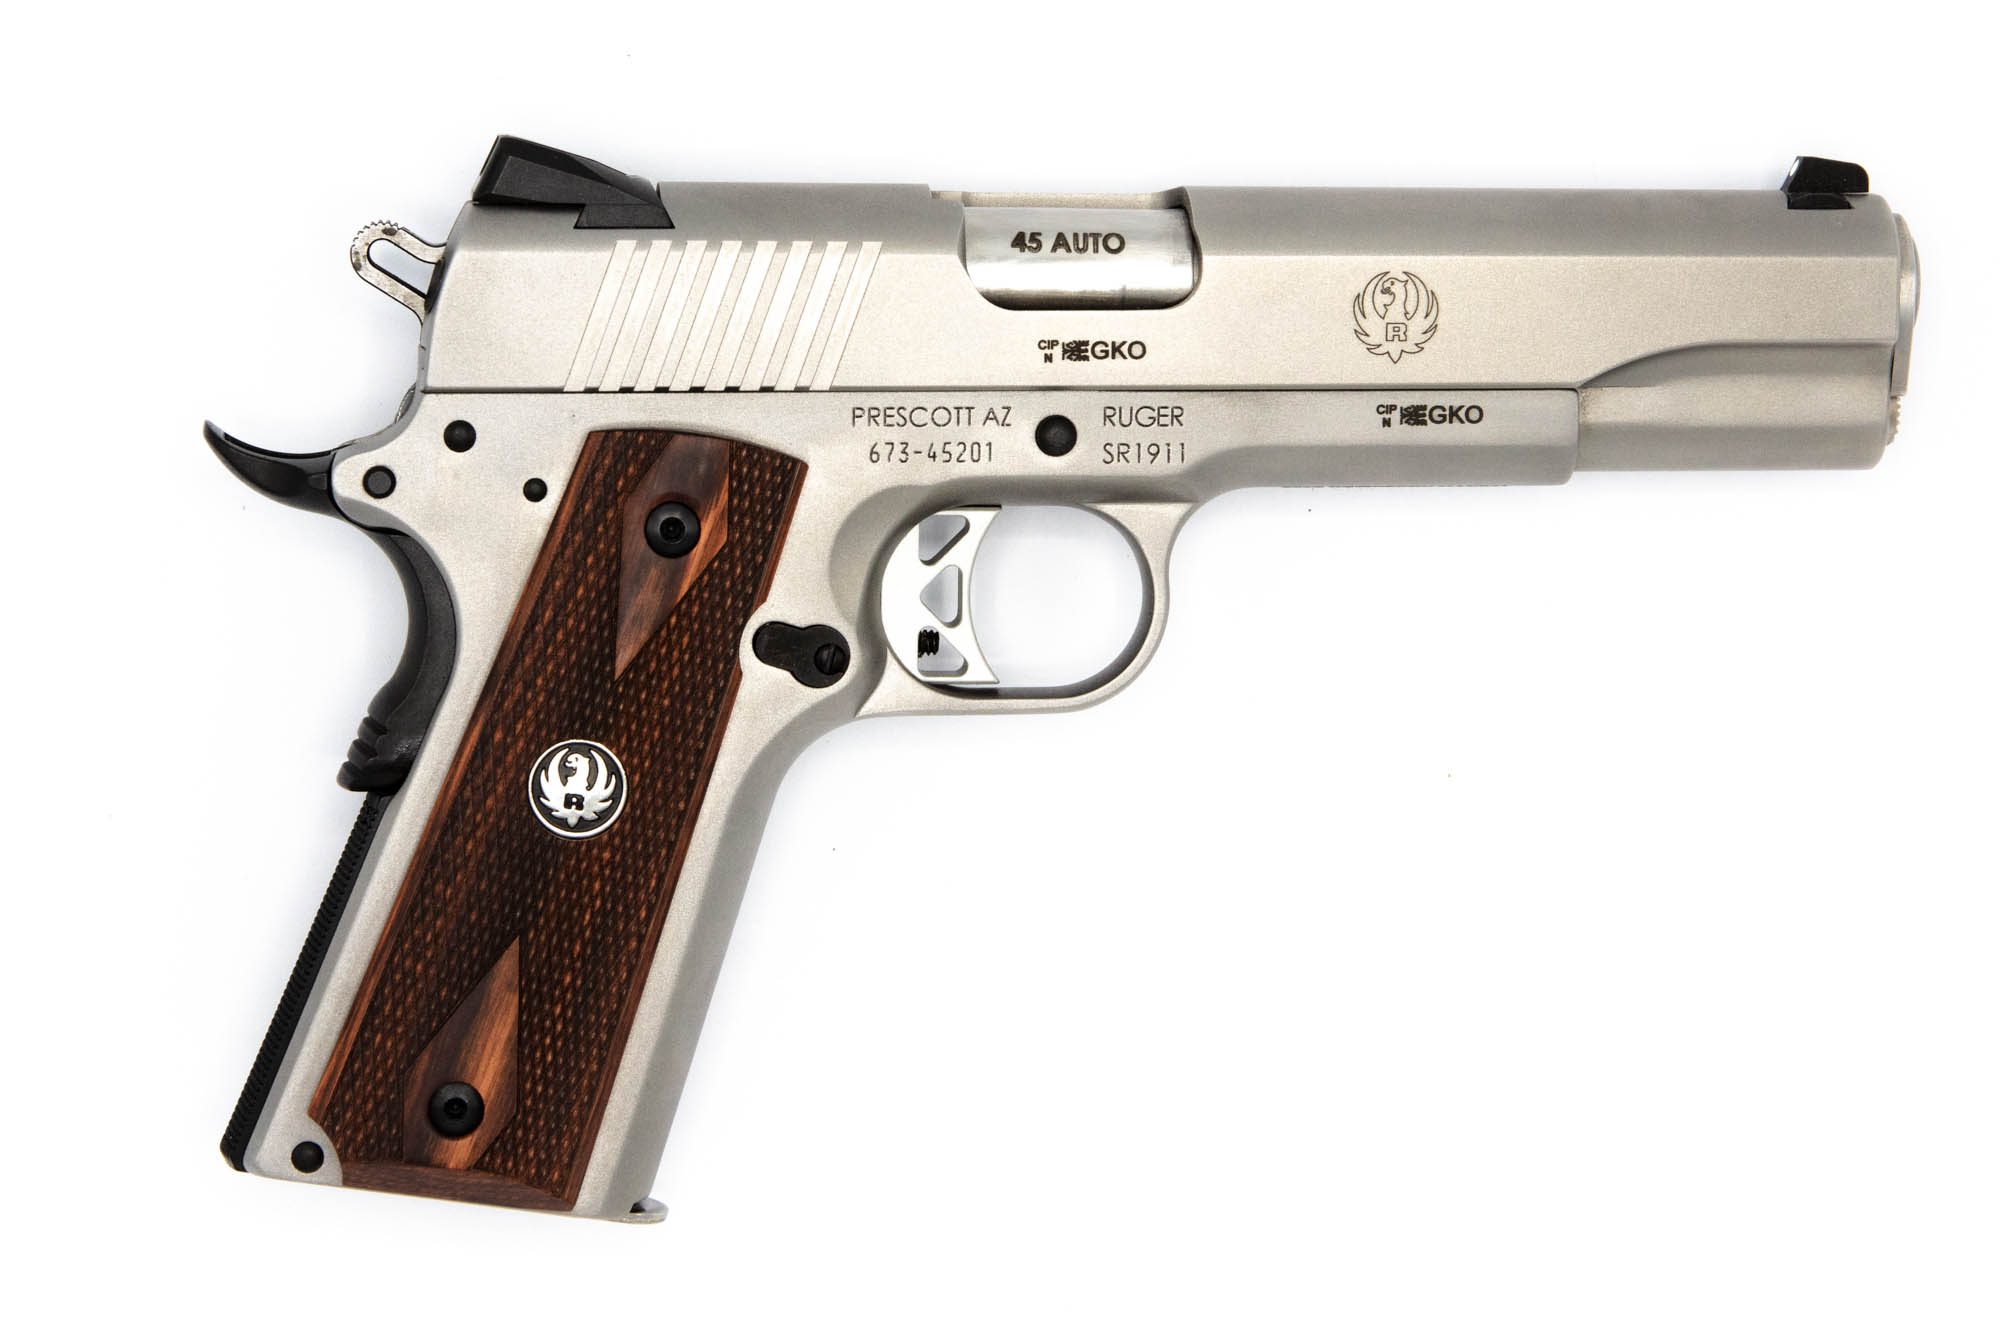 Ruger SR1911 5" stainless